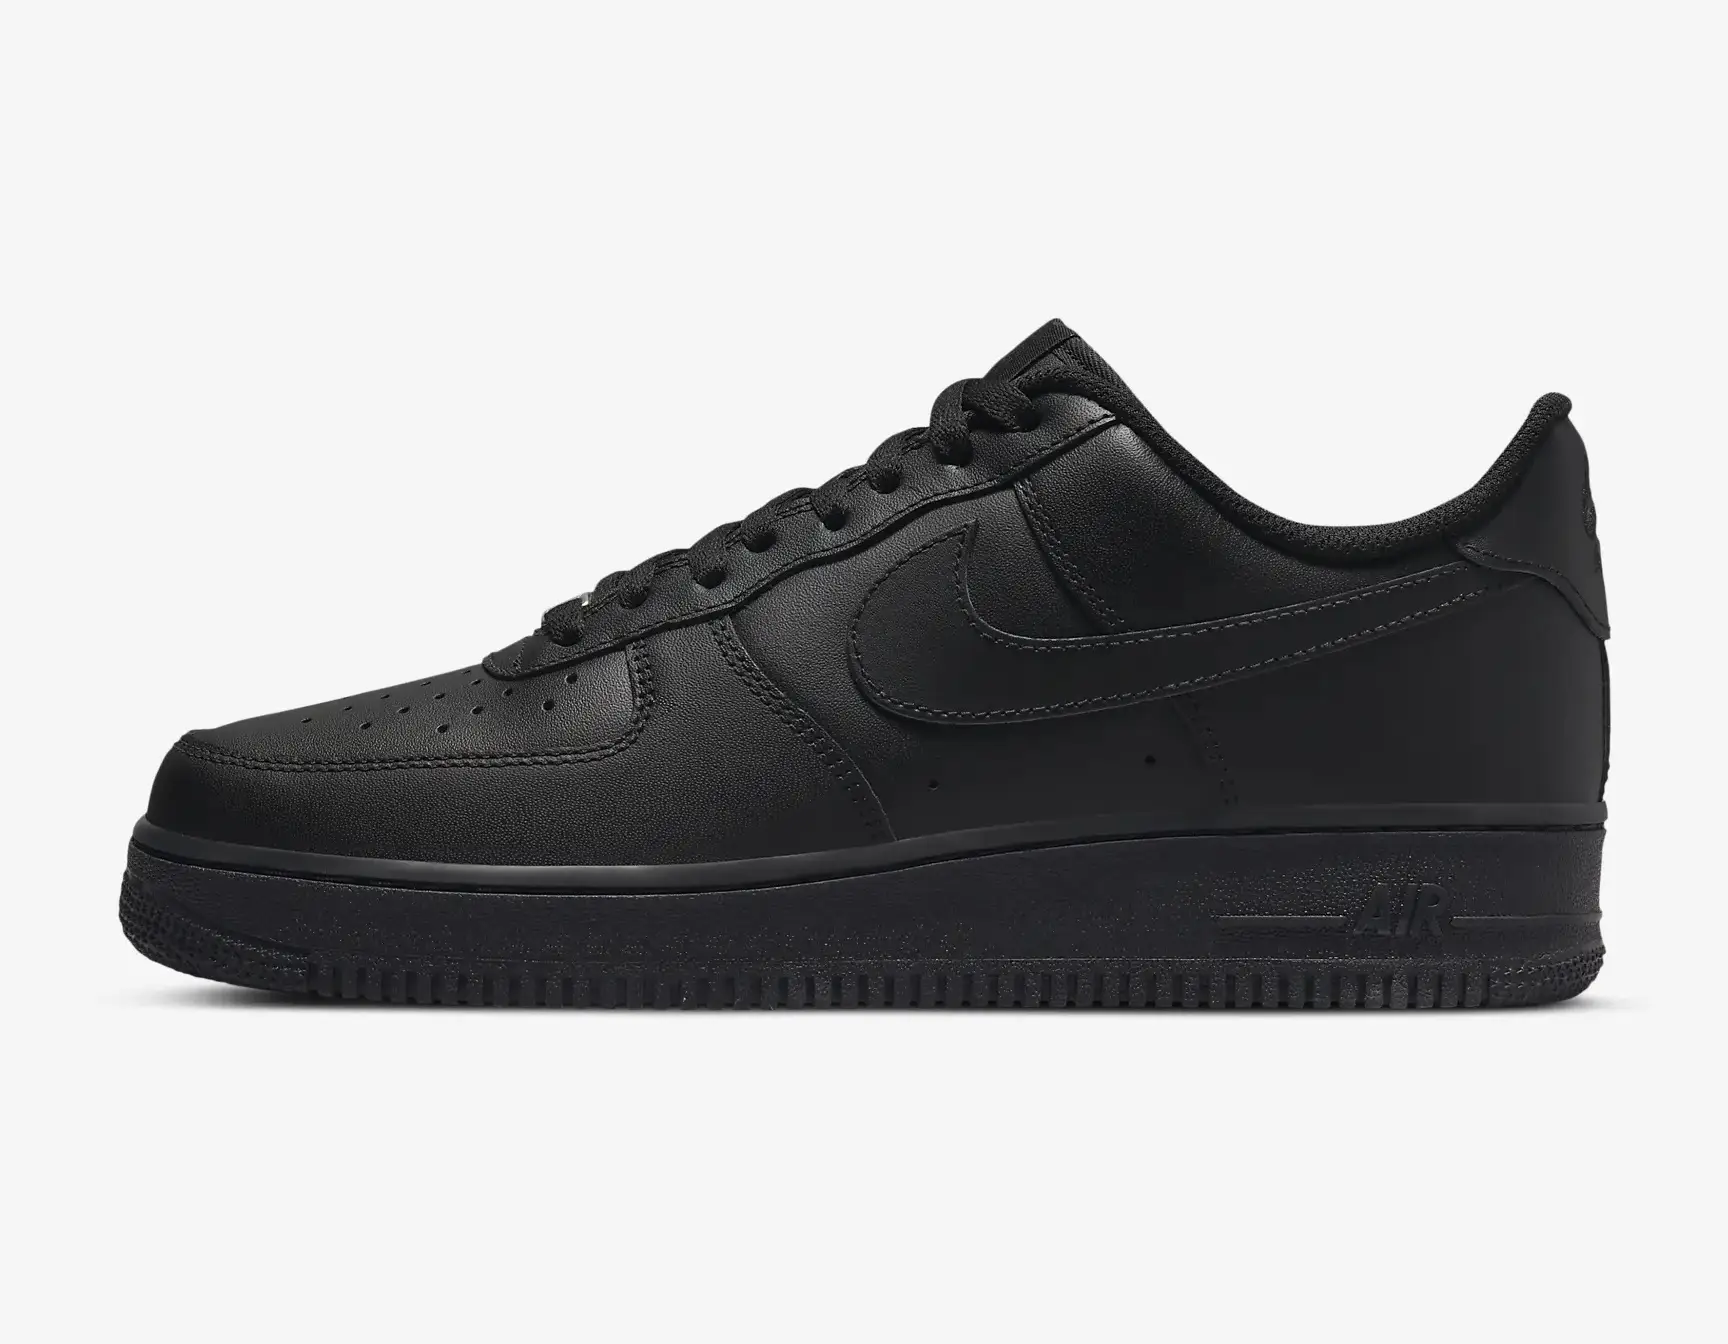 How do Air Force 1 07 fit? Is it tts or half size down? Im TTS on